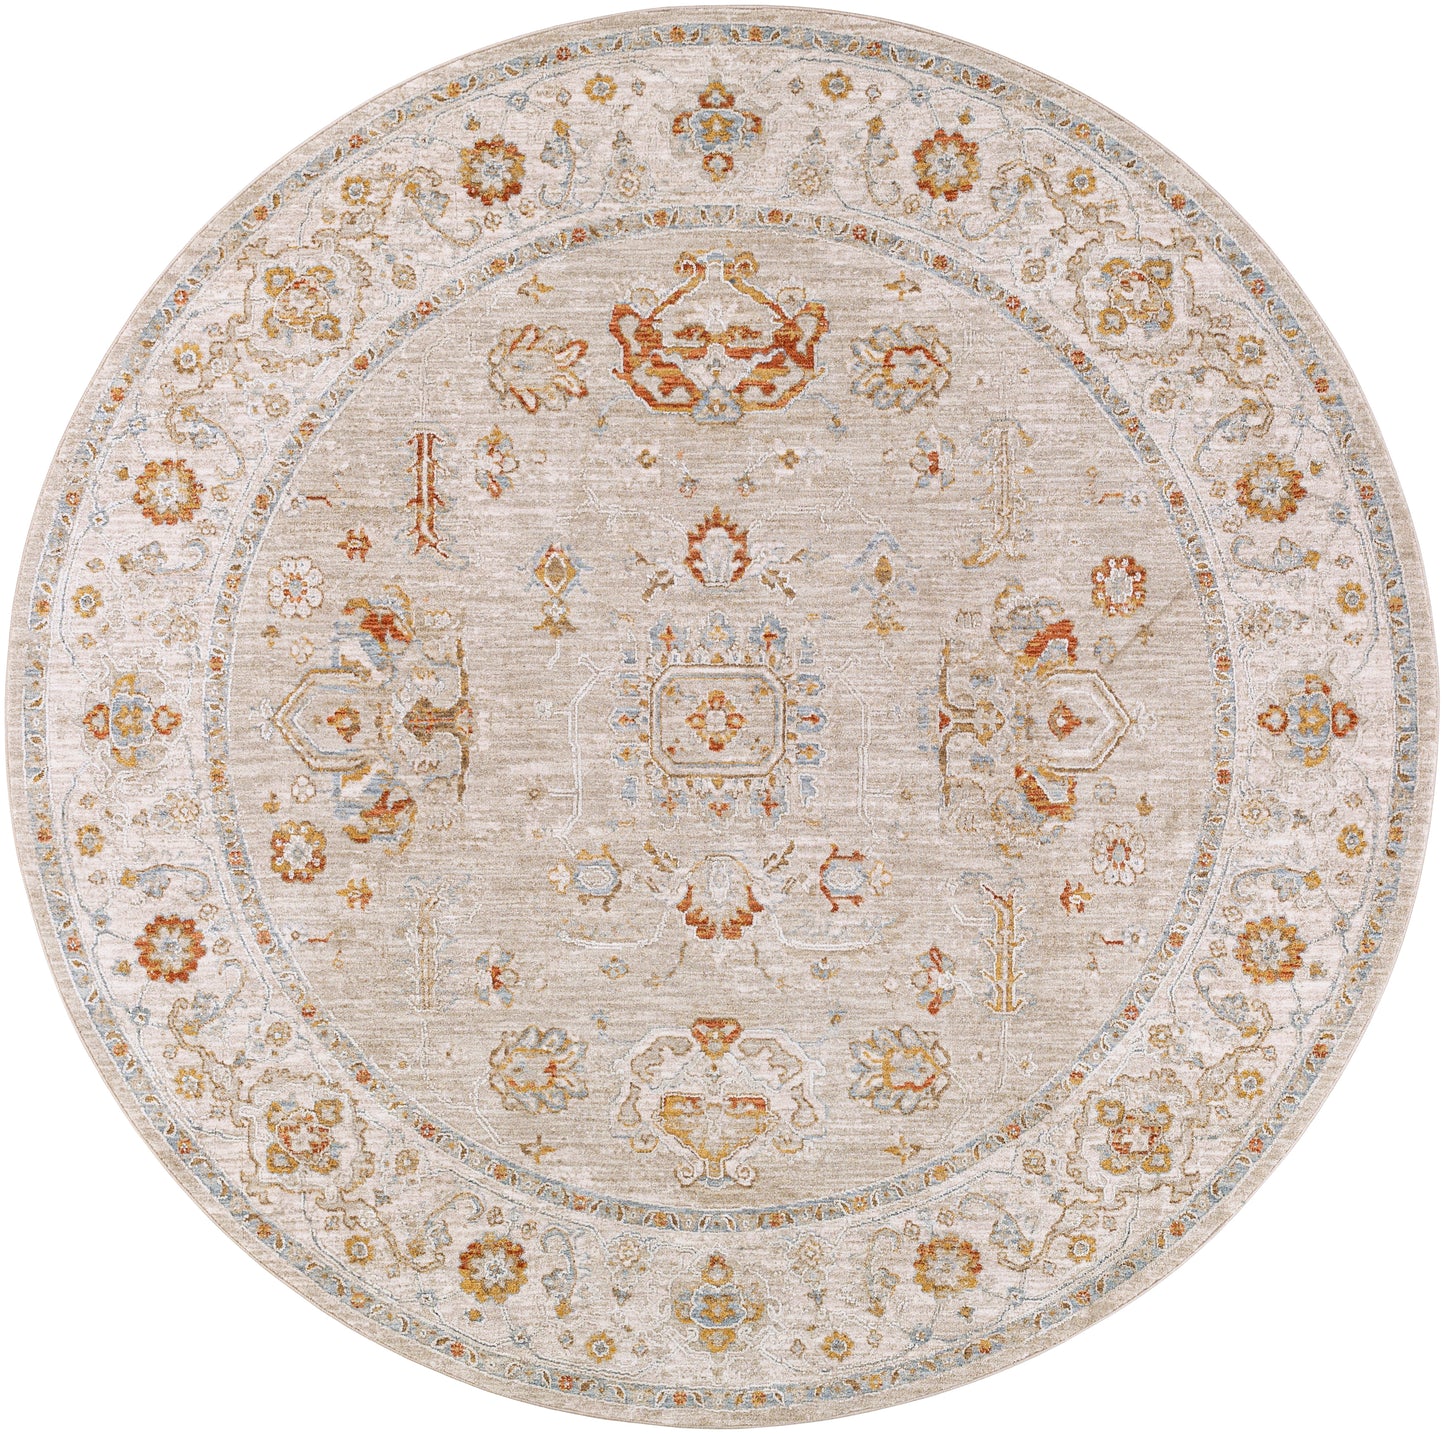 Avant Garde 27393 Machine Woven Synthetic Blend Indoor Area Rug by Surya Rugs